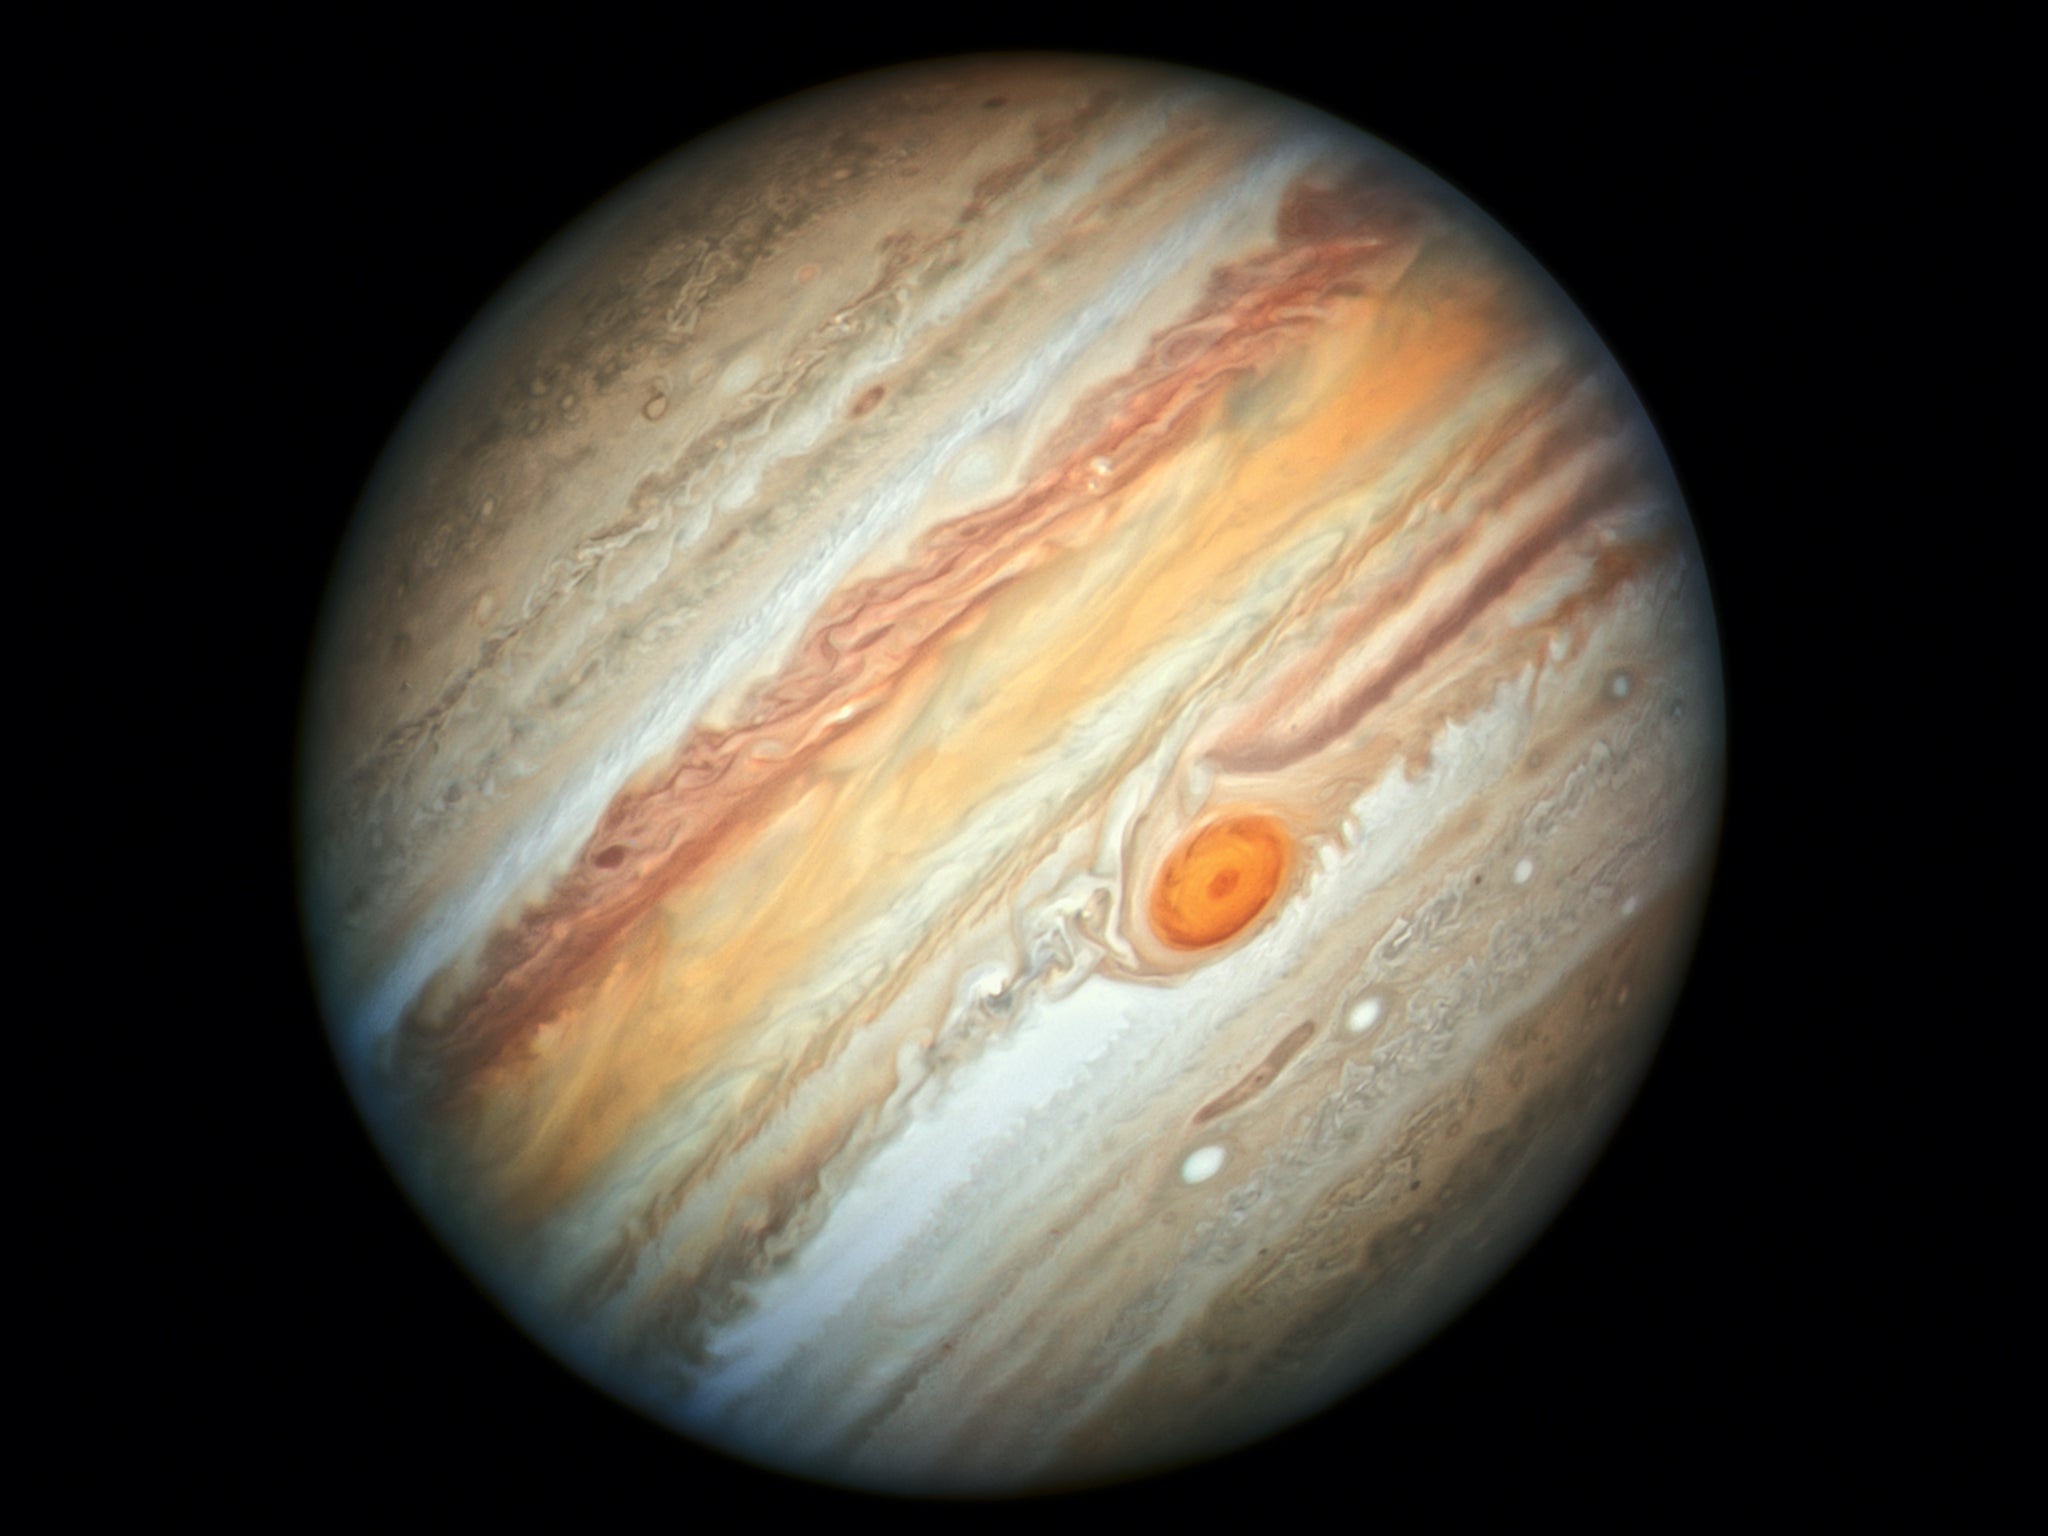 Mysterious 'elves' and 'sprites' seen in Jupiter's atmosphere from Nasa mission - The Independent